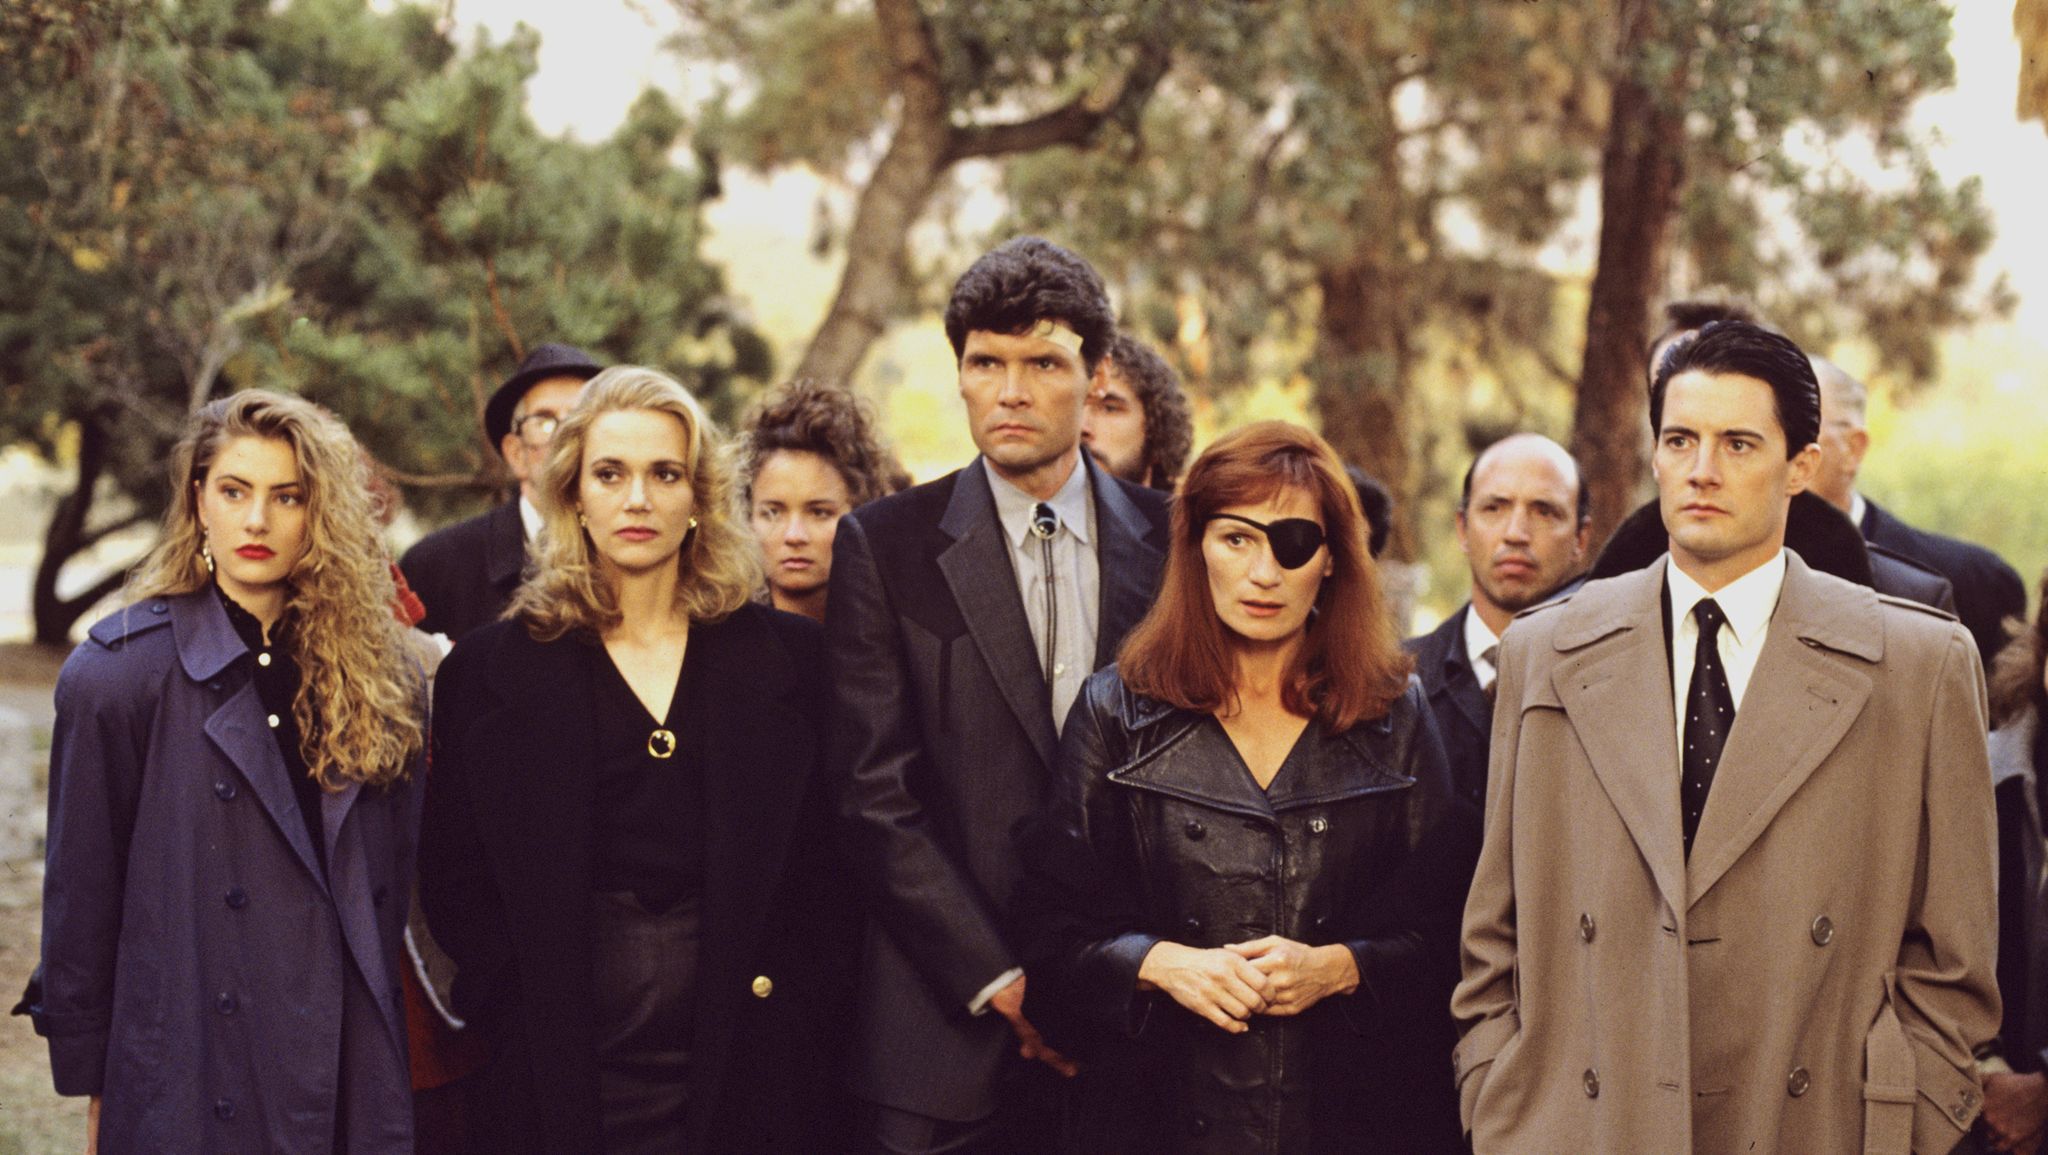 united states   april 26  twin peaks   episode three   season one   4261990, fbi special agent dale cooper kyle maclaughlin, right at former homecoming queen laura palmers funeral with a lineup of mournerssuspects, from left shelly johnson madchen amick, norma jennings peggy lipton, ed hurley everett mcgill and nadine hurley wendy robie,  photo by walt disney television via getty images photo archiveswalt disney television via getty images